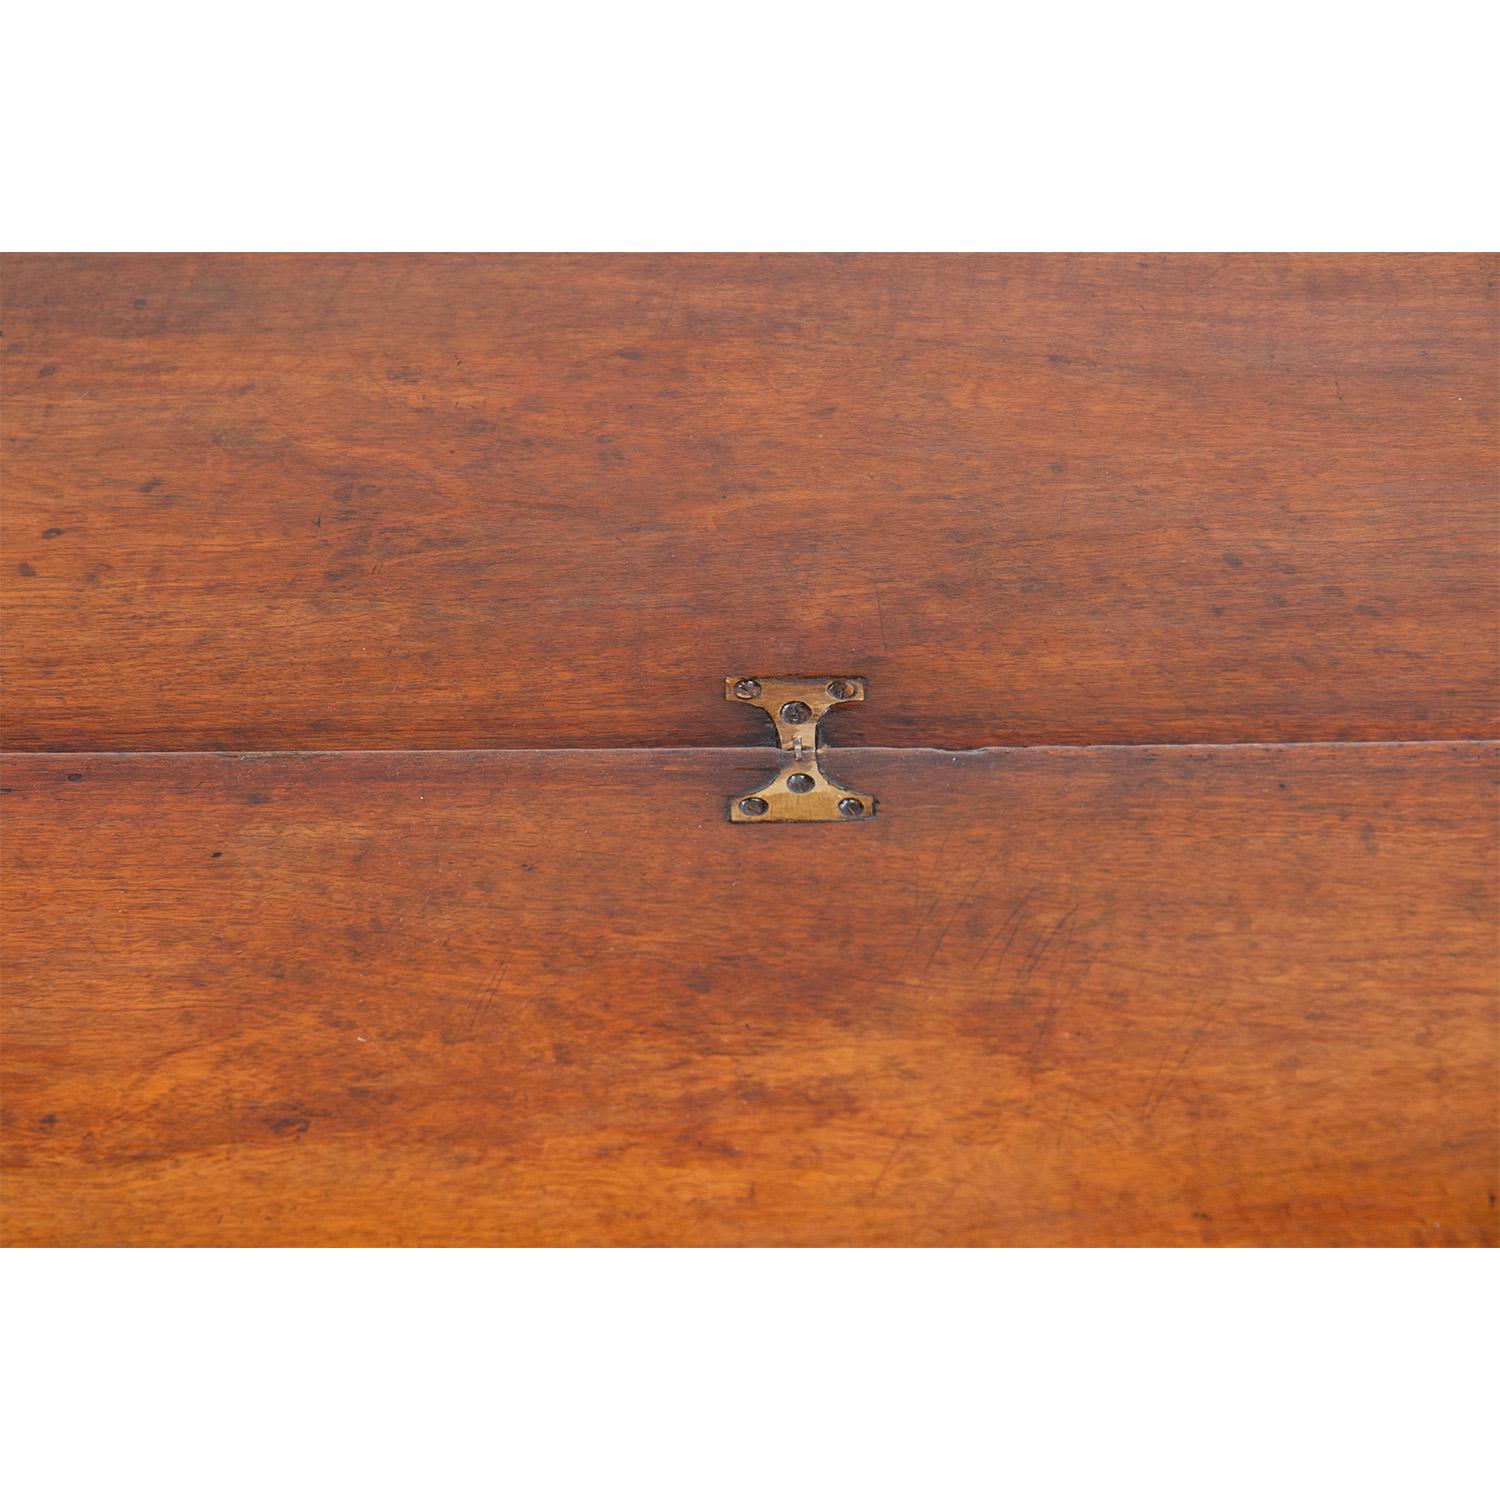 Elegant, understated demilune table made from cherrywood, circa 18th century.
Measures: 29.75